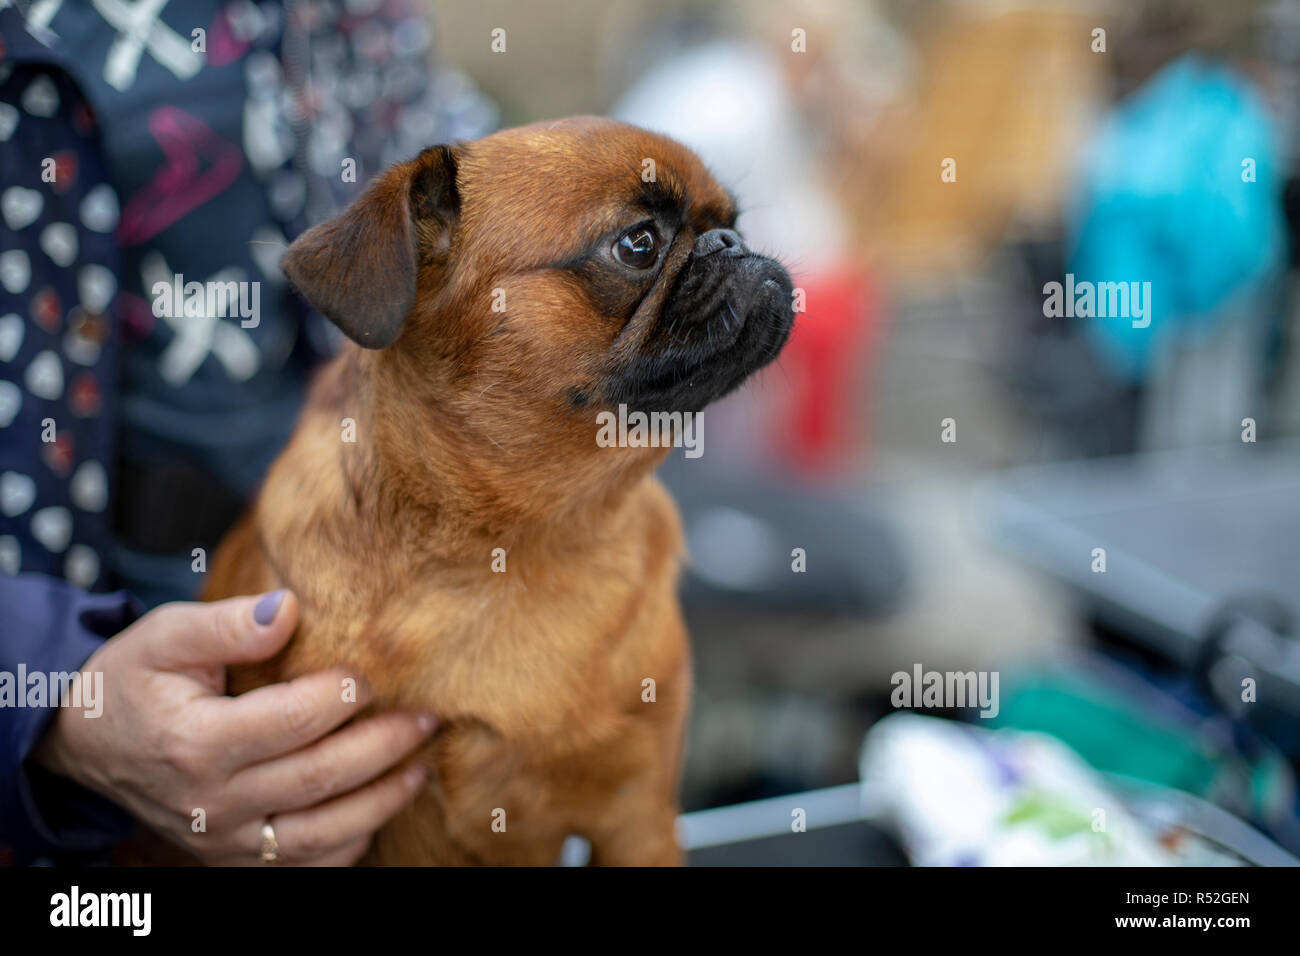 Little pug dog sitting on a  woman's lap, held by a hand with lilac nails, at a dog show. Stock Photo